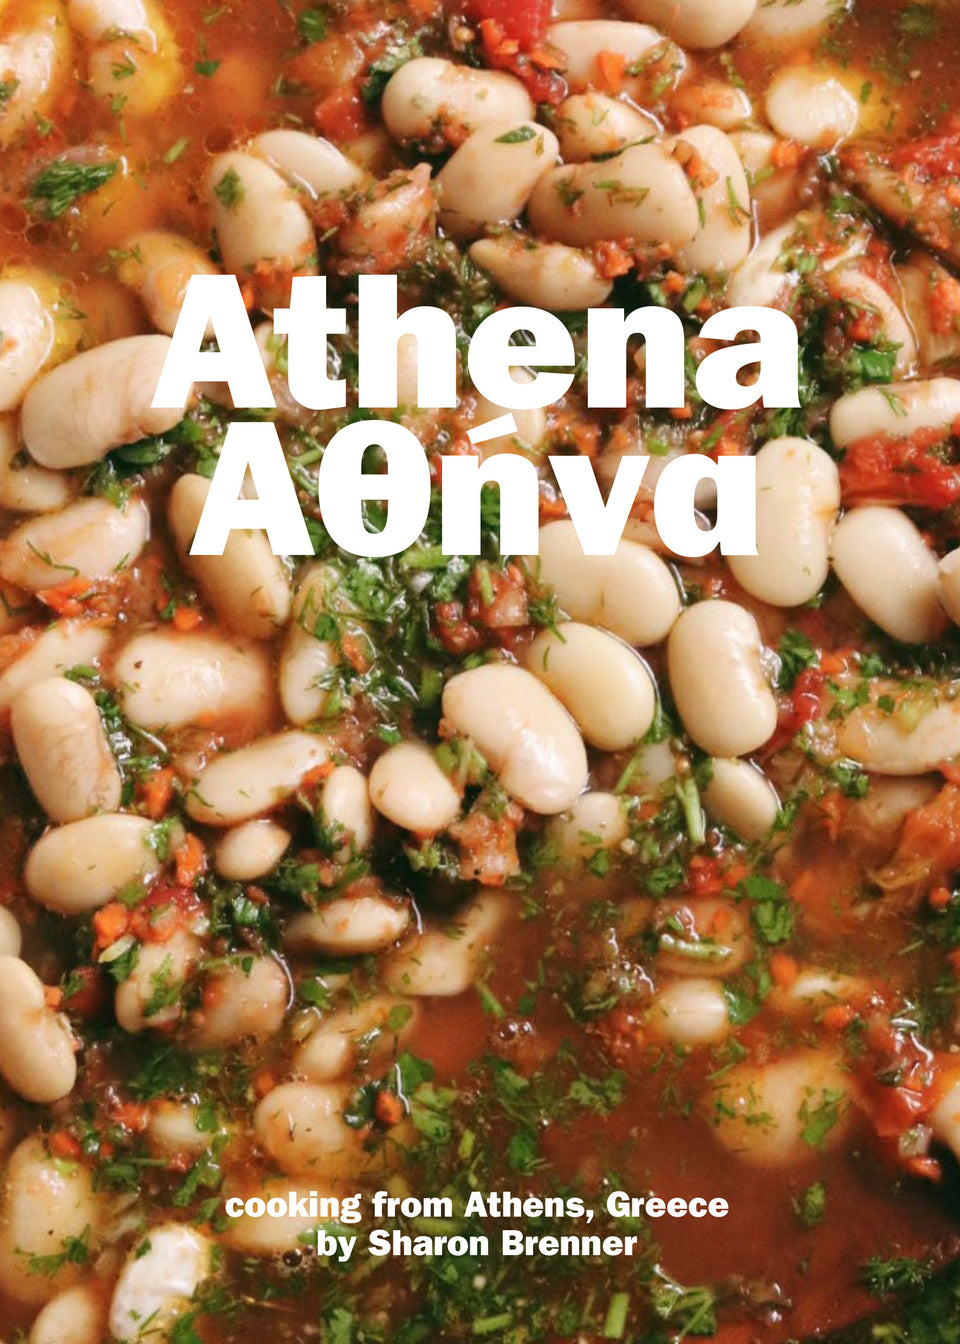 Athena: Cooking from Athens, Greece